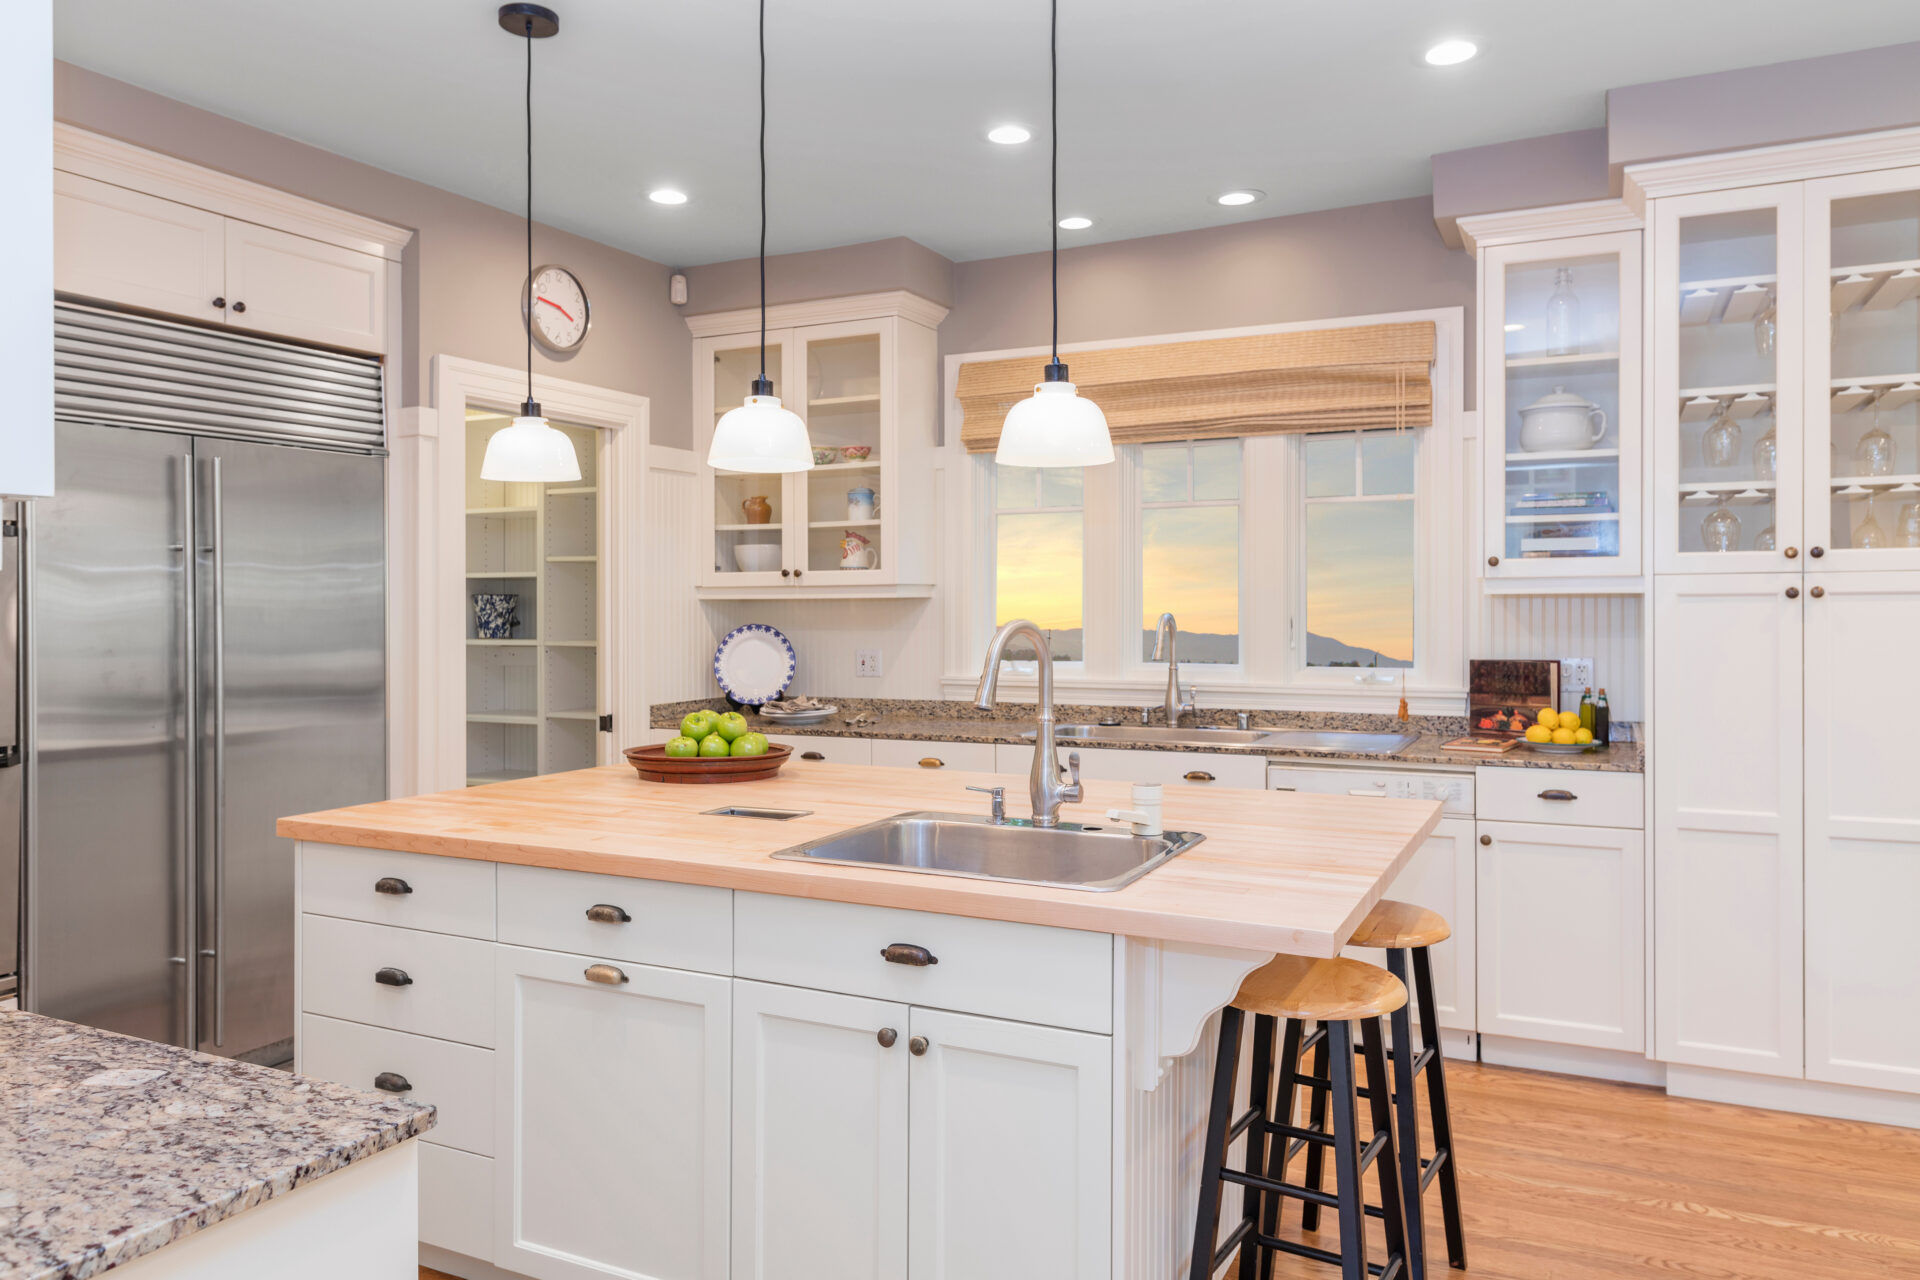 Expert kitchen remodeling Installation By 4Ever Remodeling In Greater Chicago